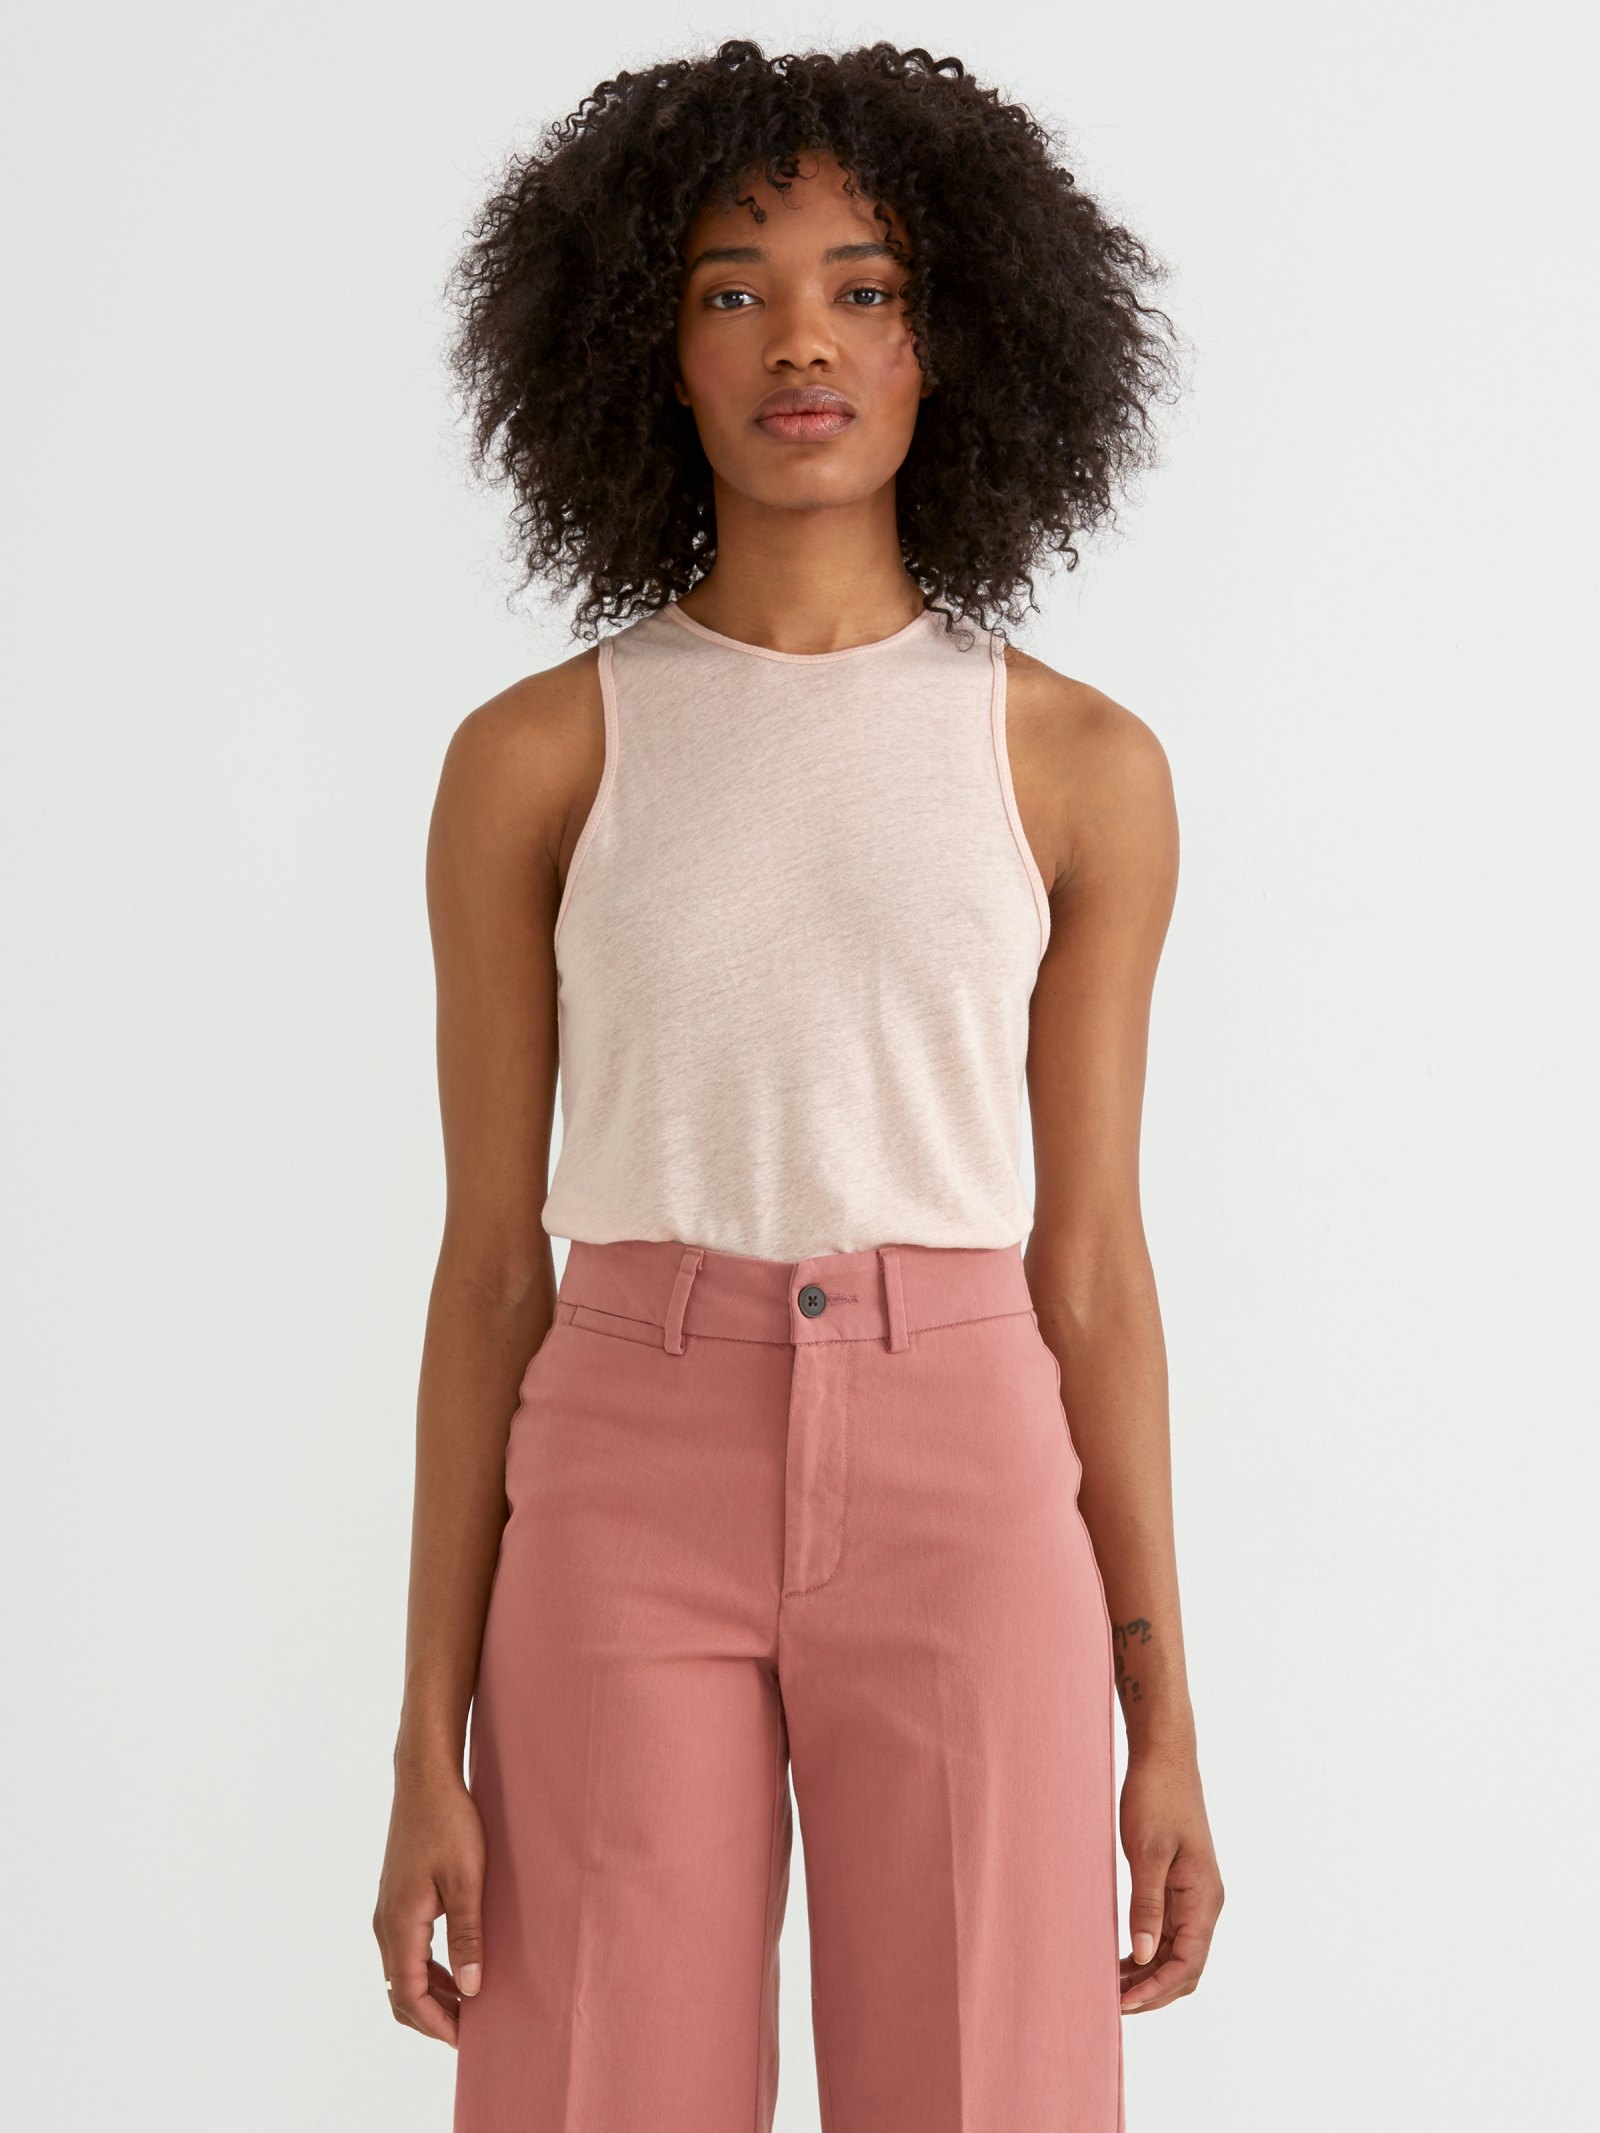 Frank And Oak Lauches Eco-Friendly Minimal Line: Best Buys